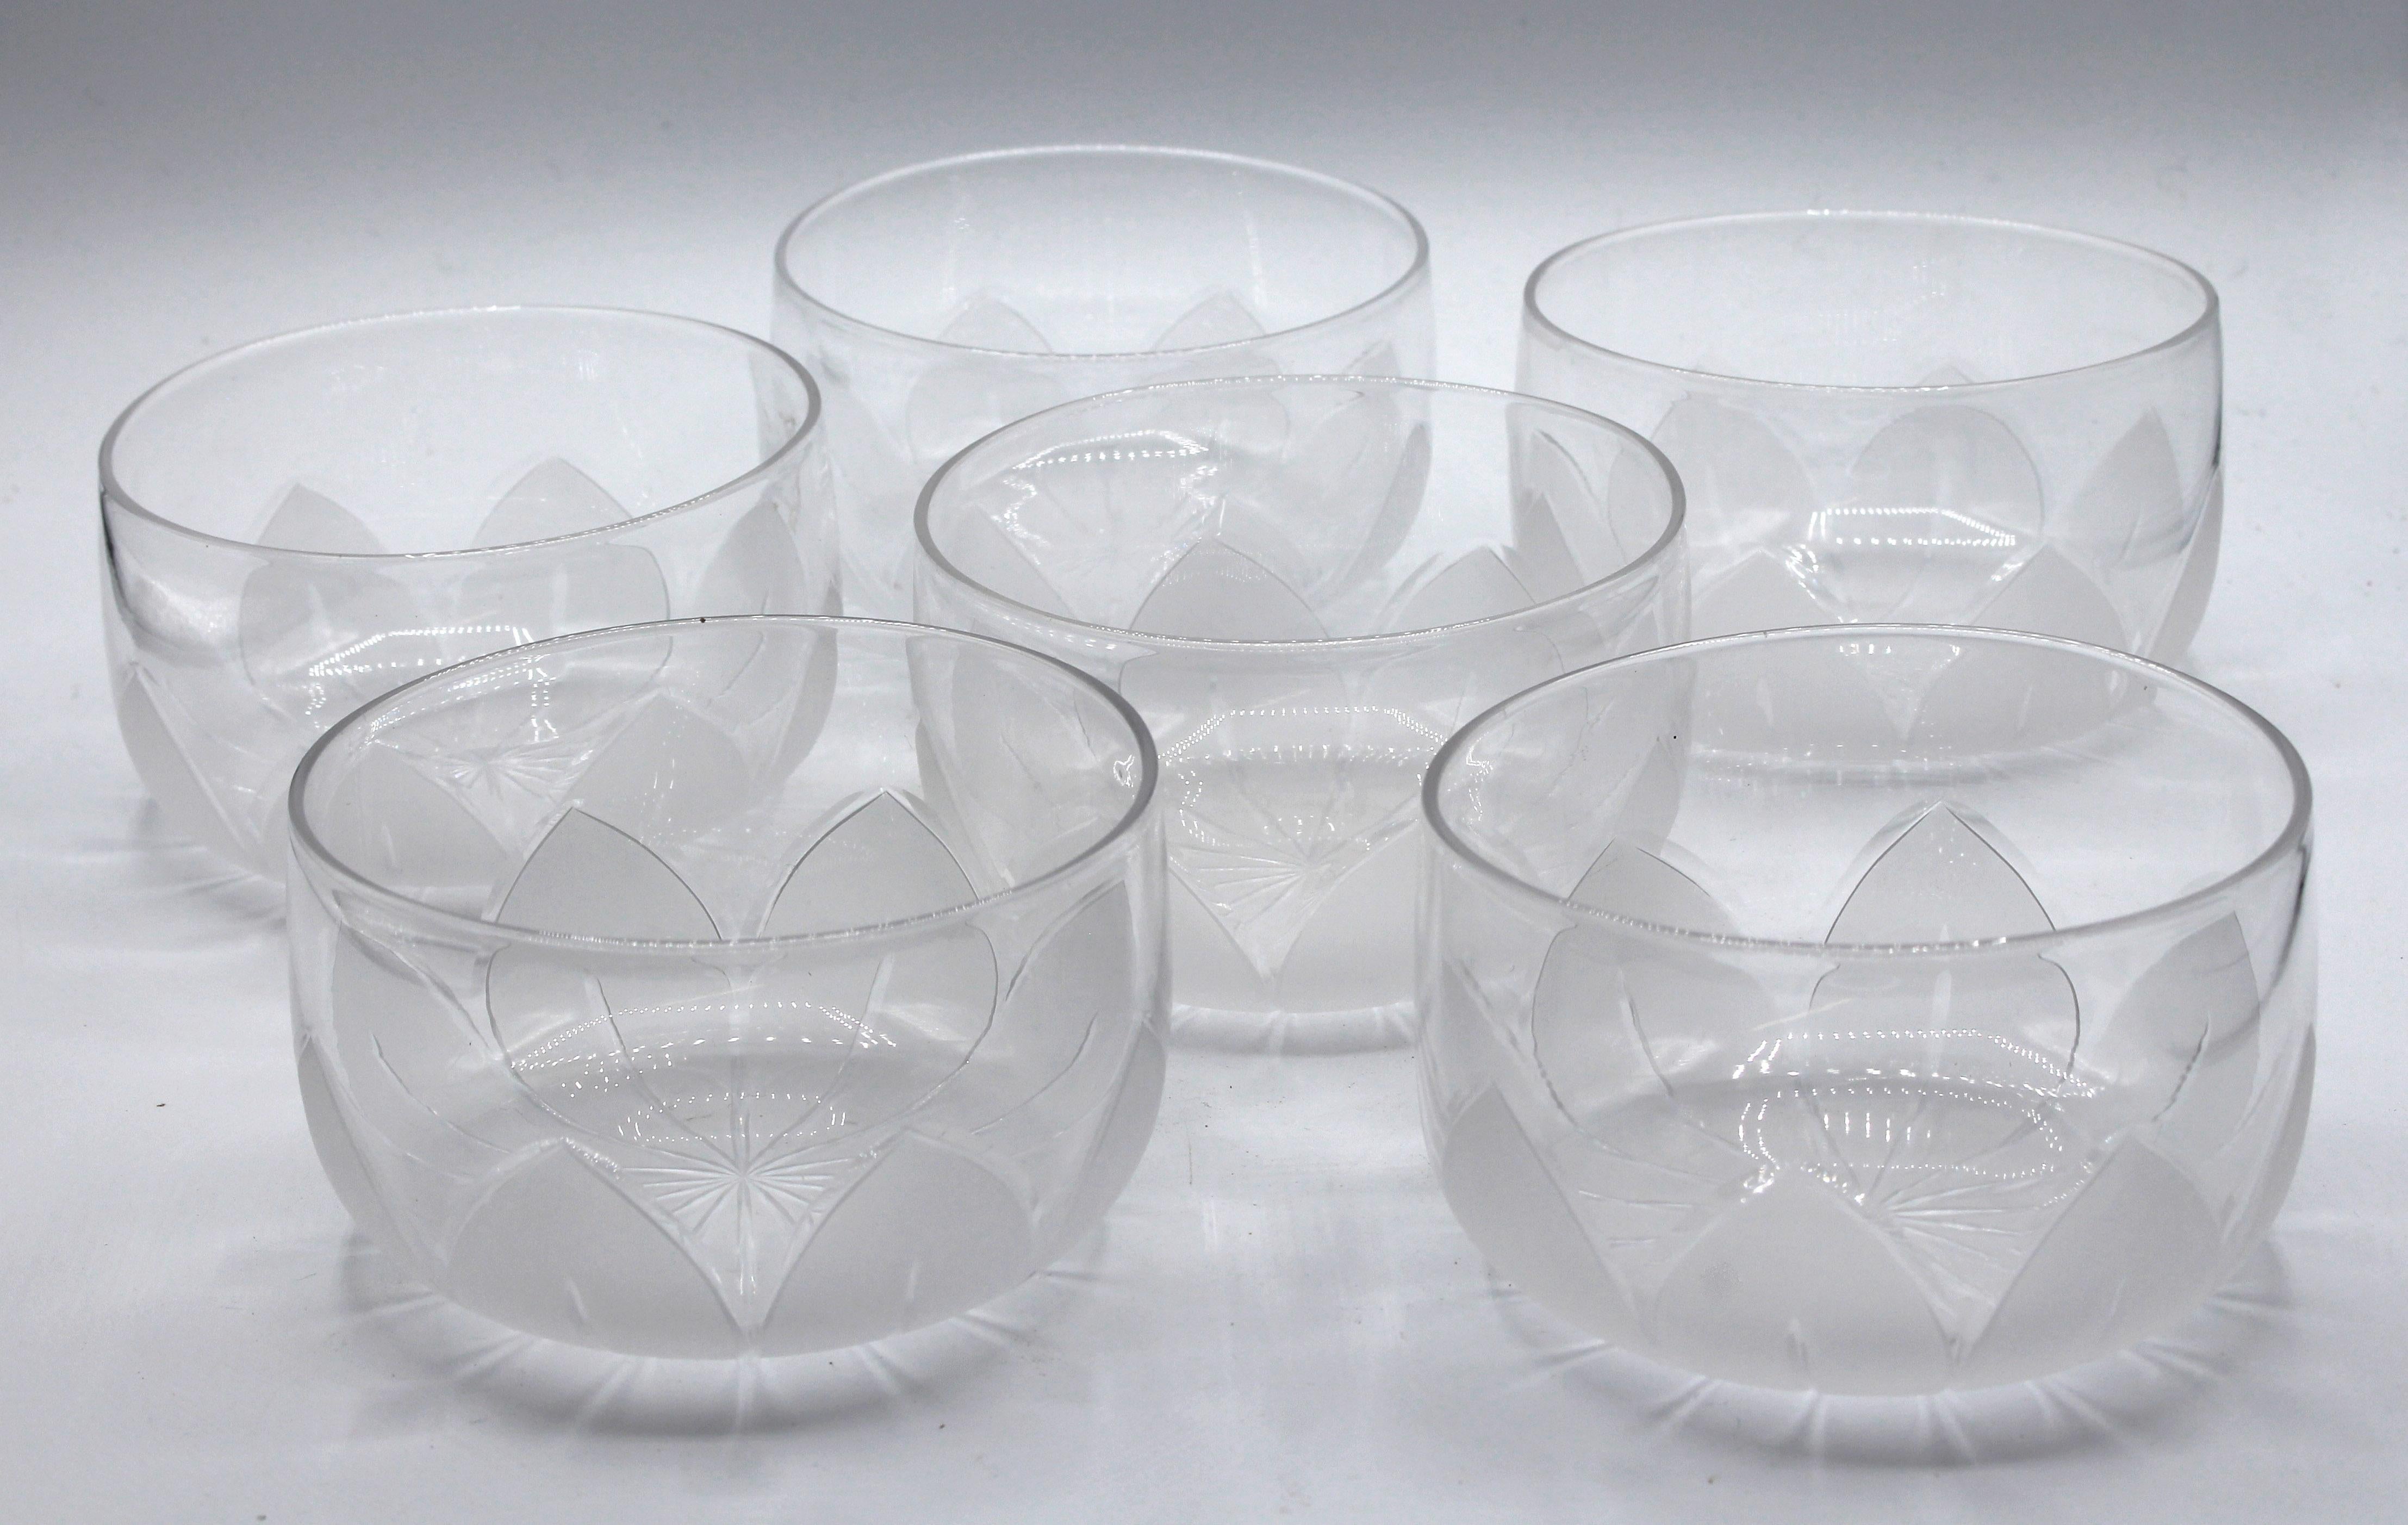 A set of 6 elegant frosted lotus motif finger bowls, likely Scandinavian or Germanic. Cut and frosted glass. Mid-20th century. Also lovely for cut flowers or candles.

Whitehall Antiques is a family business that has been a major source for the